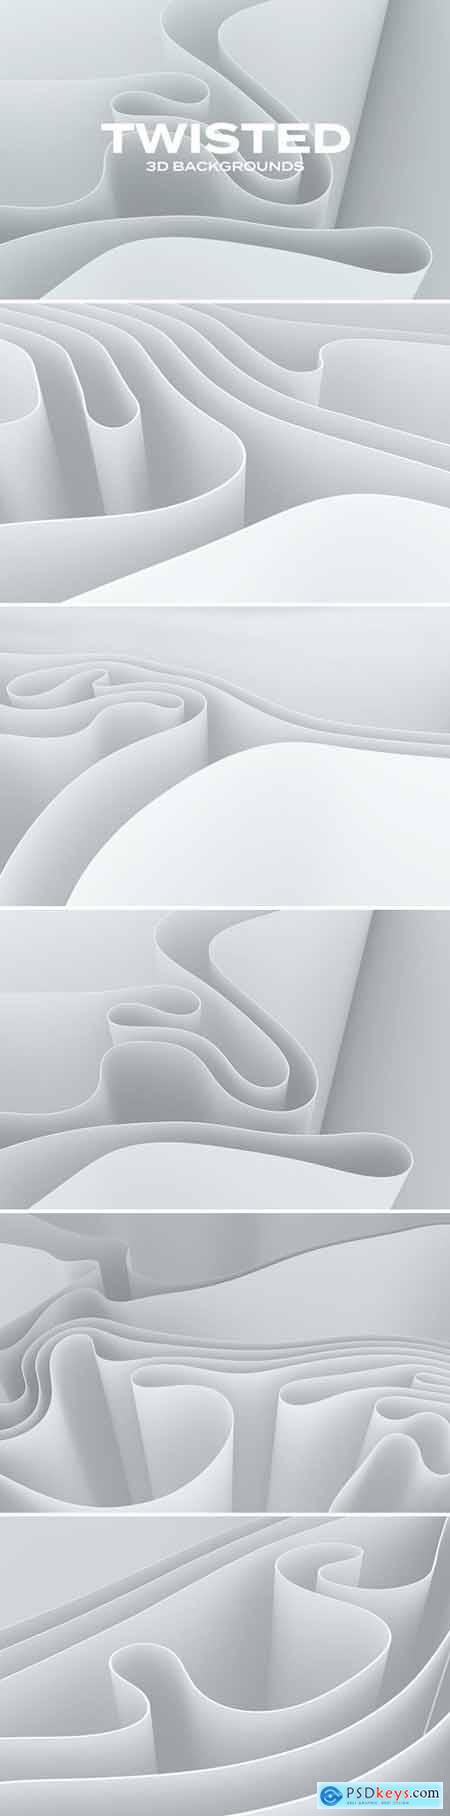 3D Twisted Backgrounds